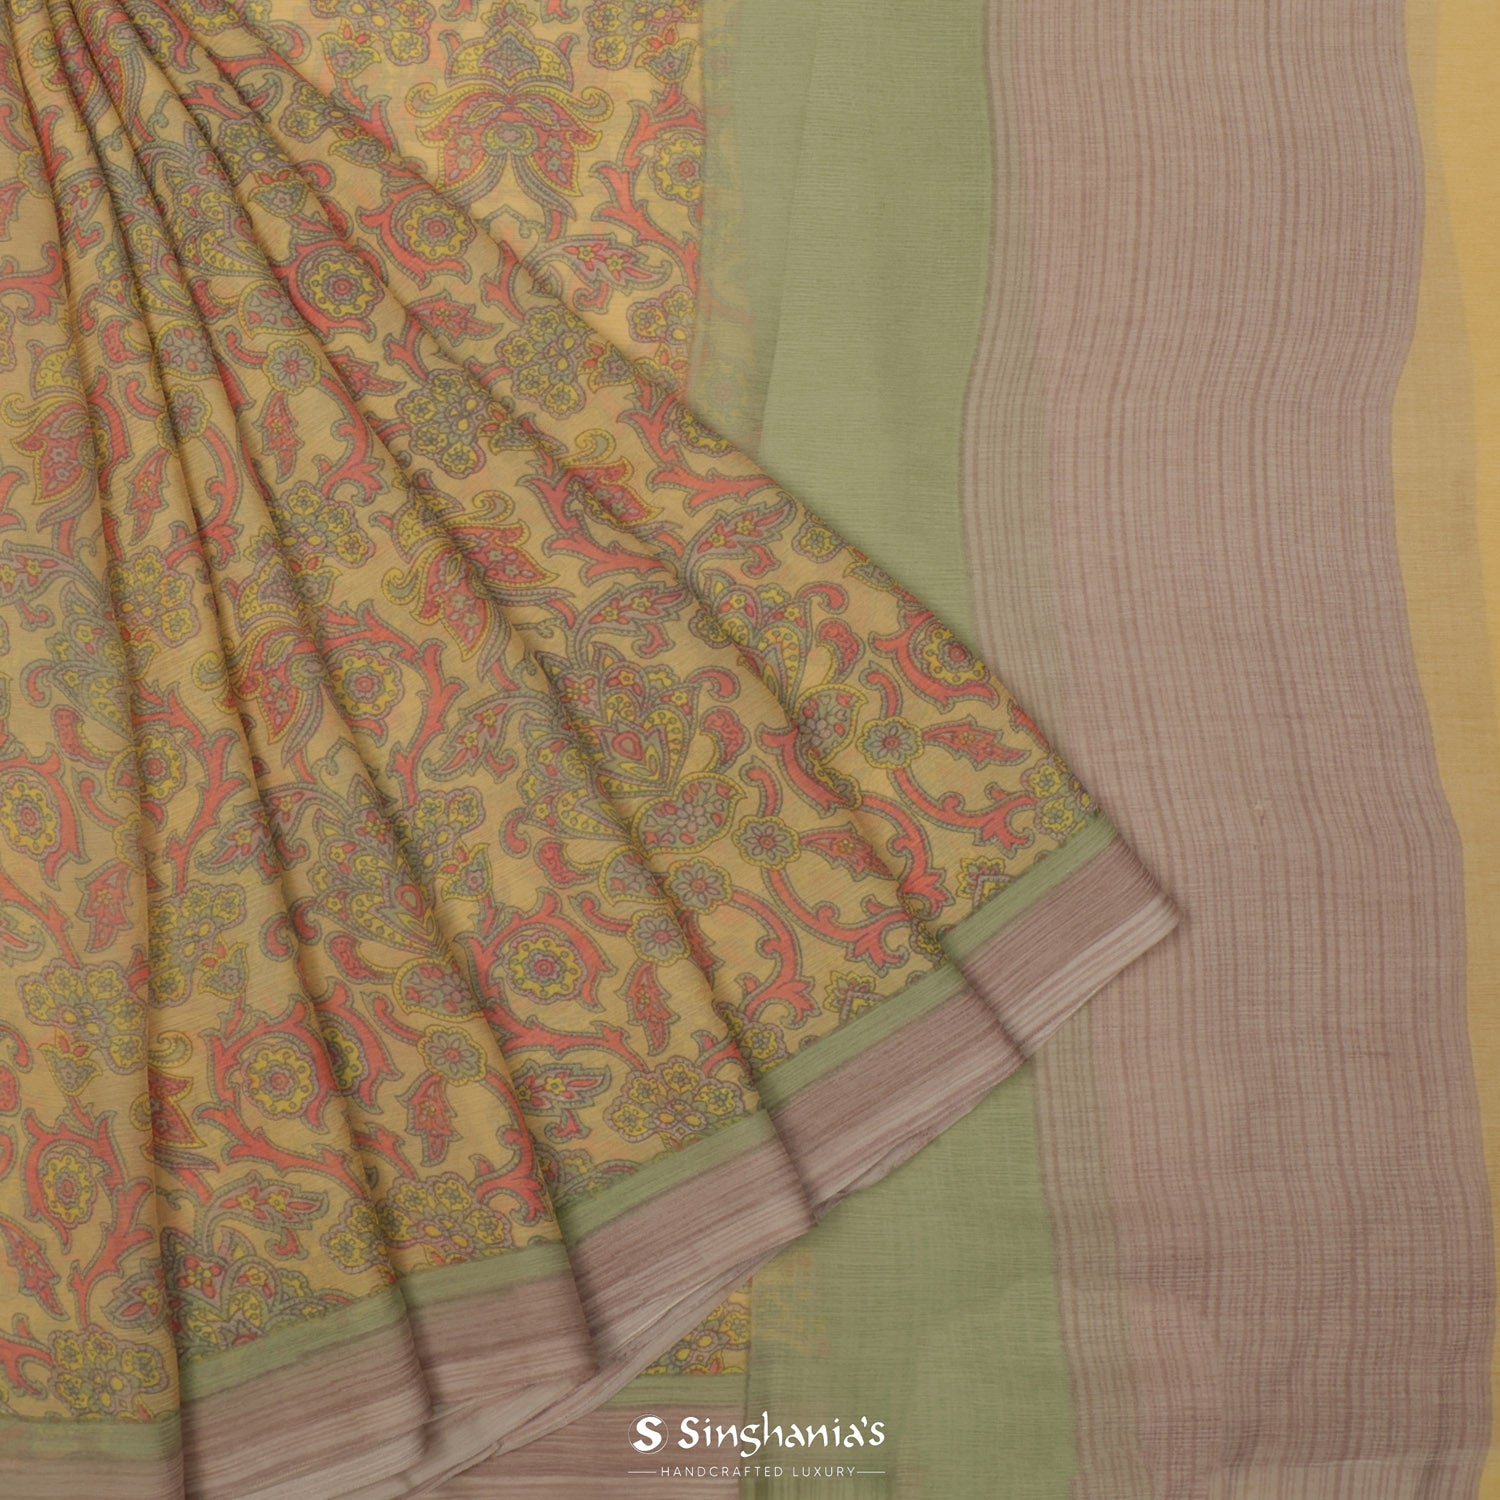 Old Yellow Printed Chiffon Saree With Floral Jaal Pattern